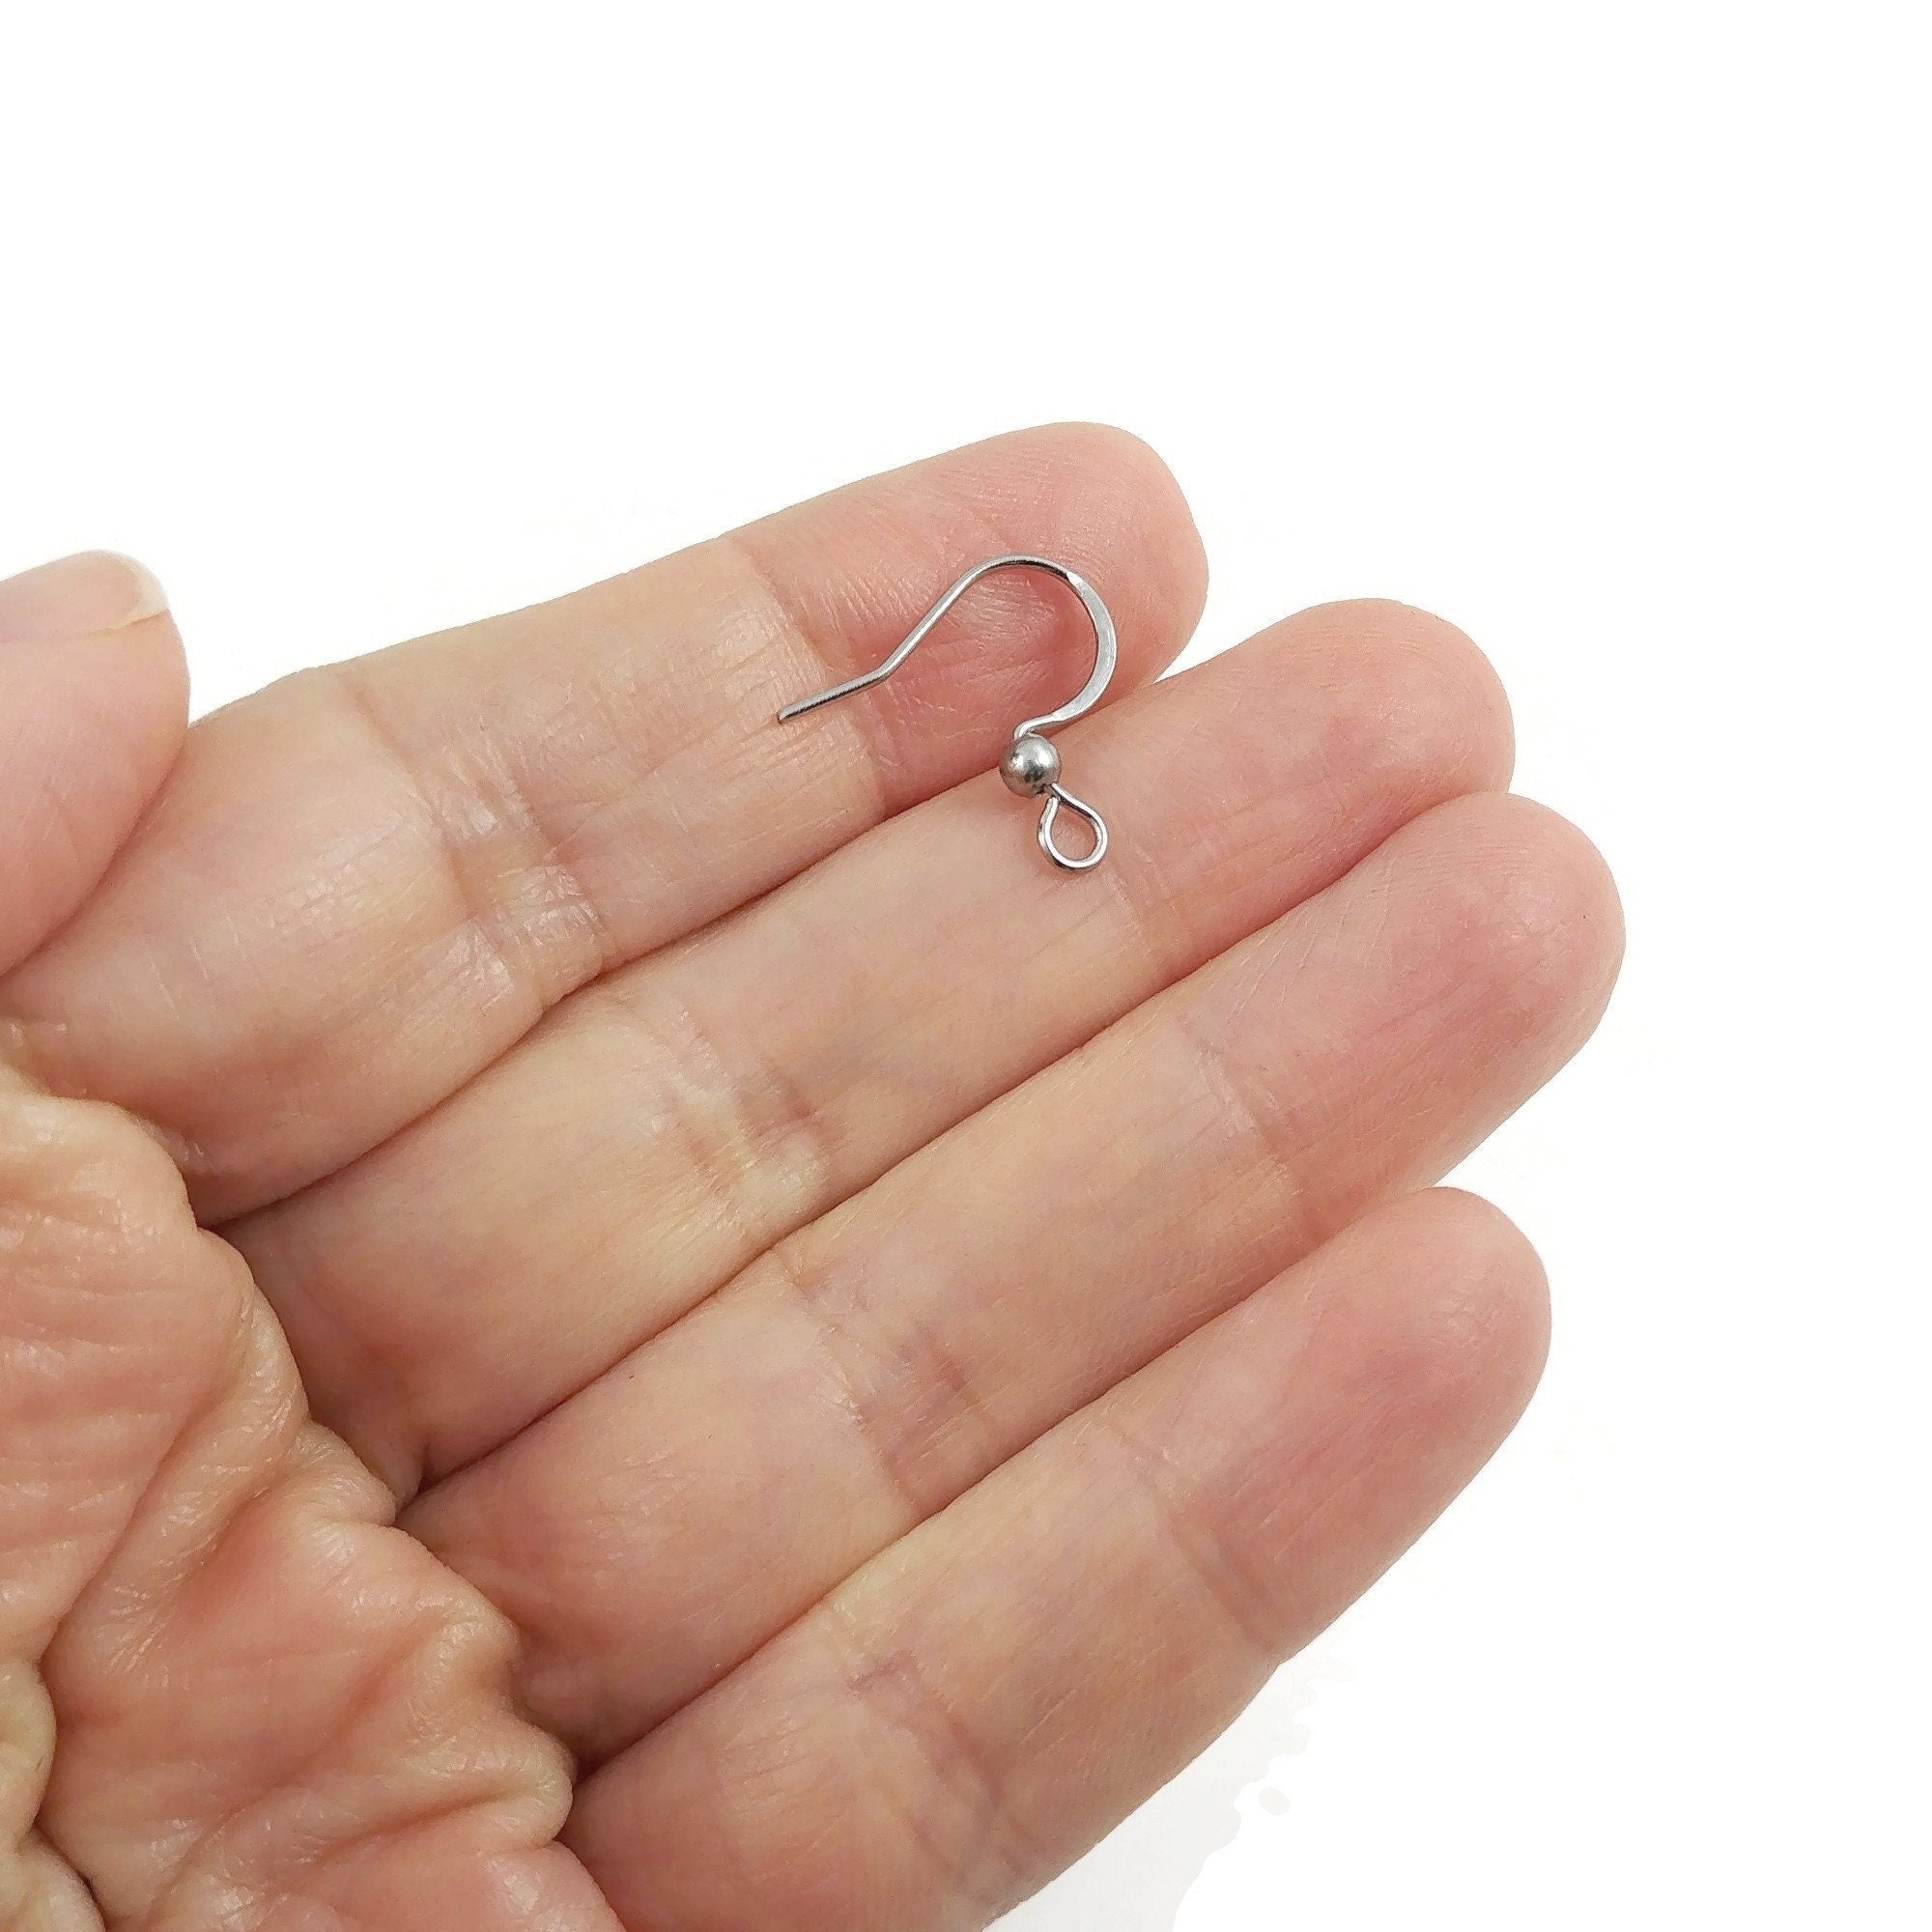 50pcs 316 Stainless Steel Hypoallergenic Earring Hooks Wires